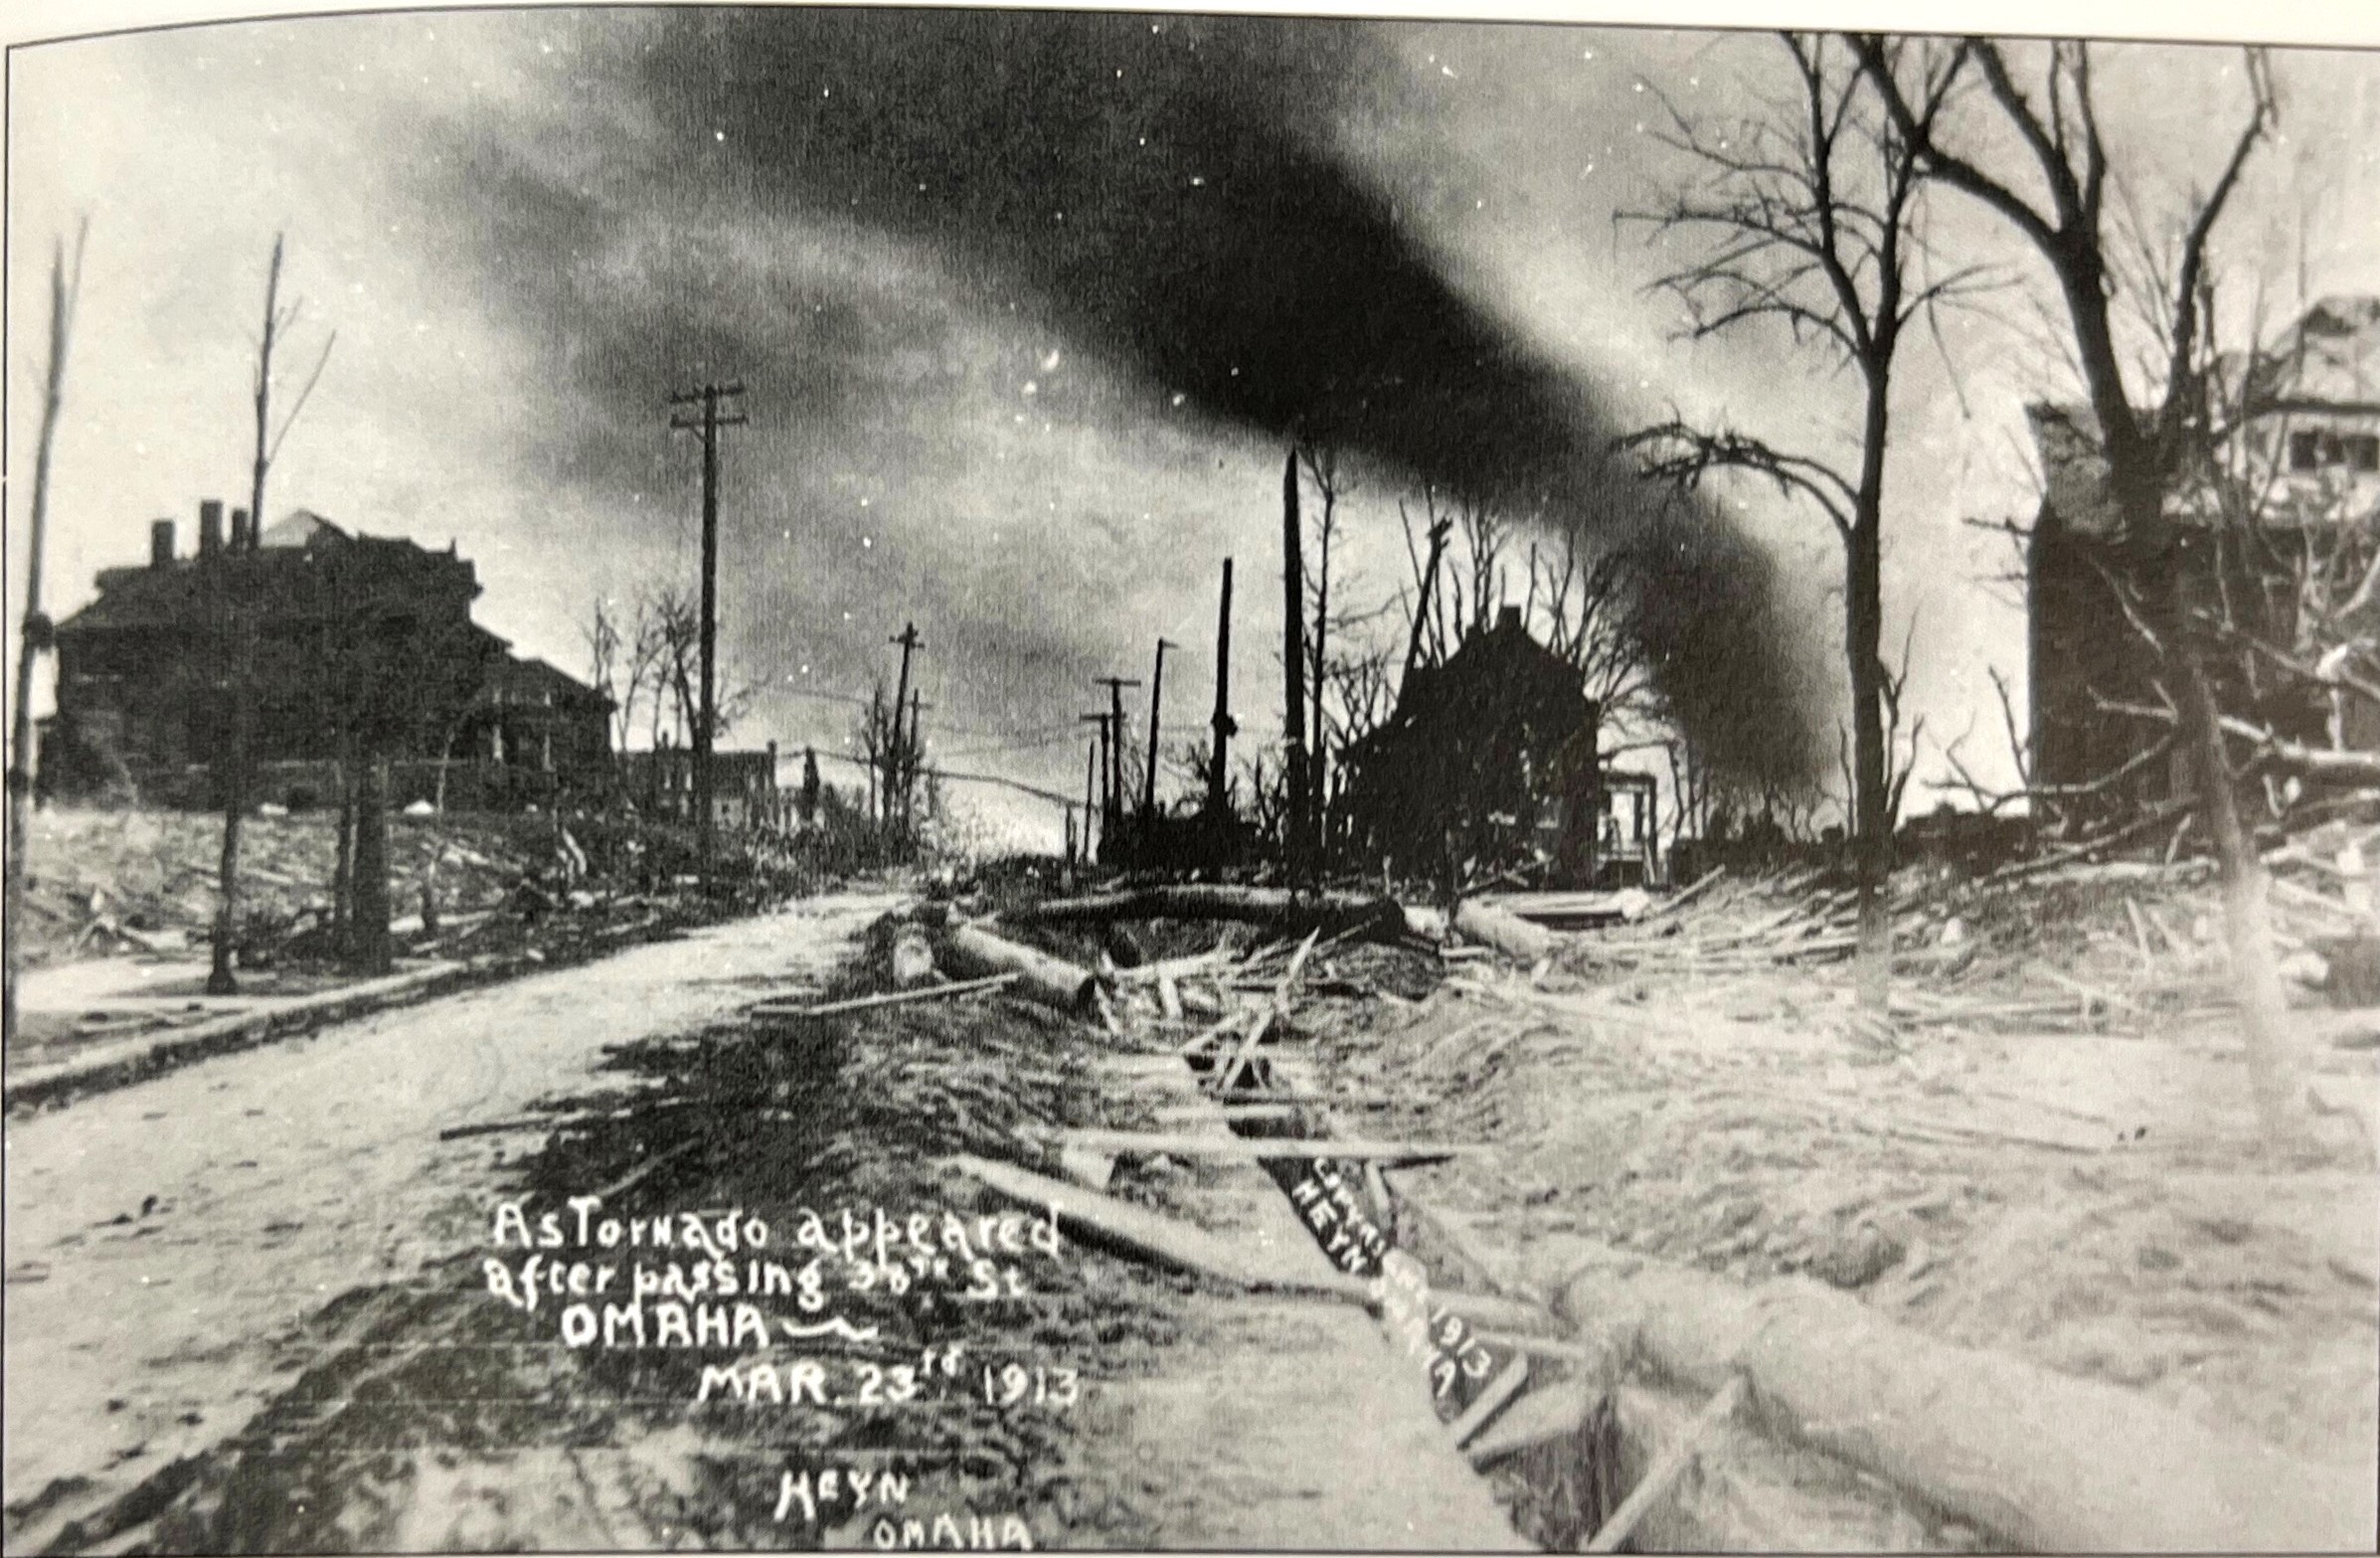 Photo of the Omaha Tornado looking north toward the Cathedral neighborhood, taken at 38th and Arbor Streets.